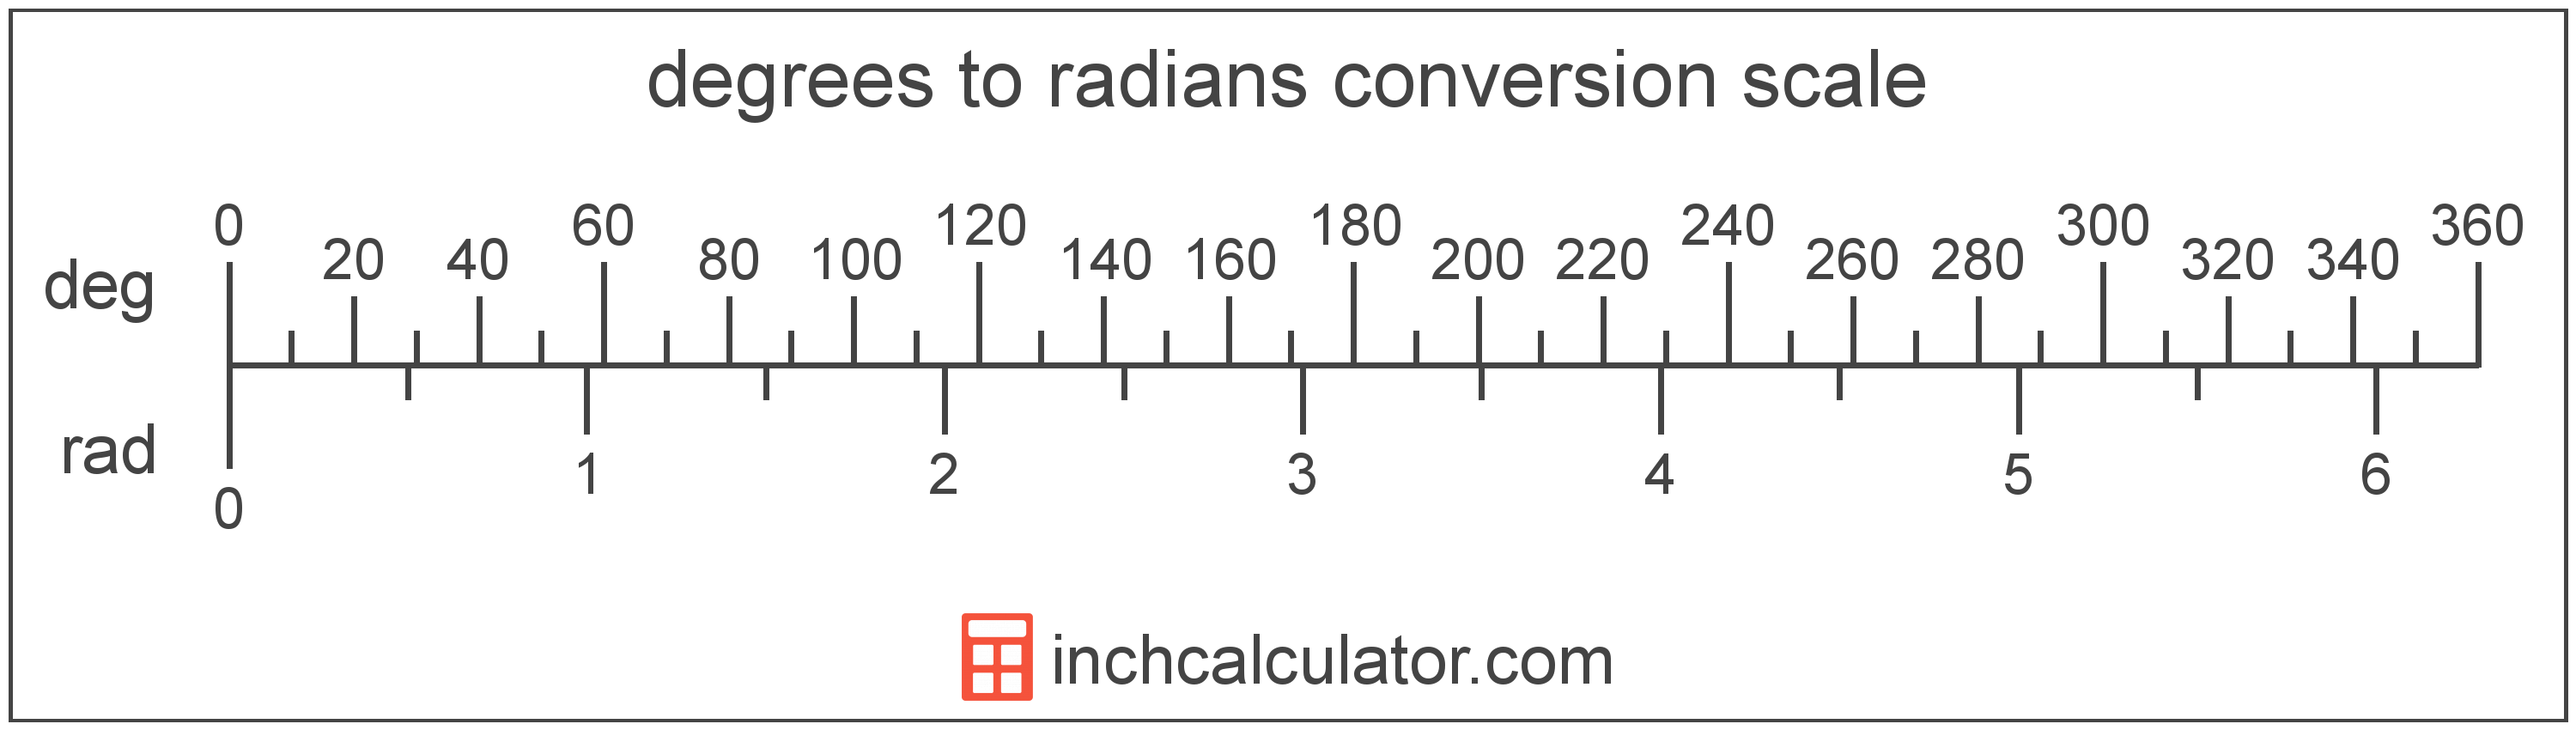 conversion scale showing radians and equivalent degrees angle values